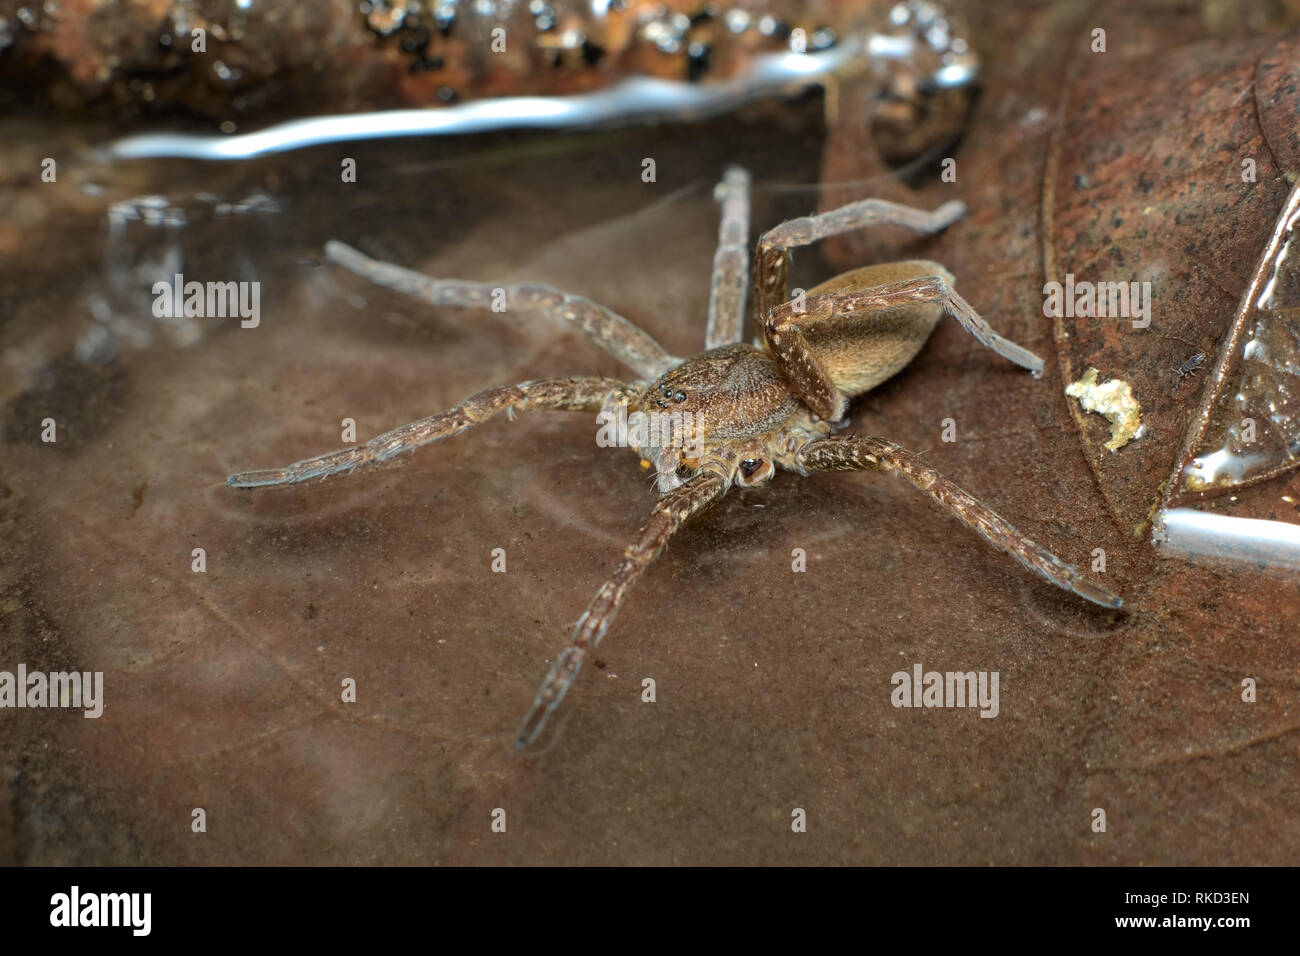 A semi-acquatic great or fen raft spider (Dolomedes plantarius) hunting its prey walking on the surface of water between brown dead leaves in a swamp Stock Photo